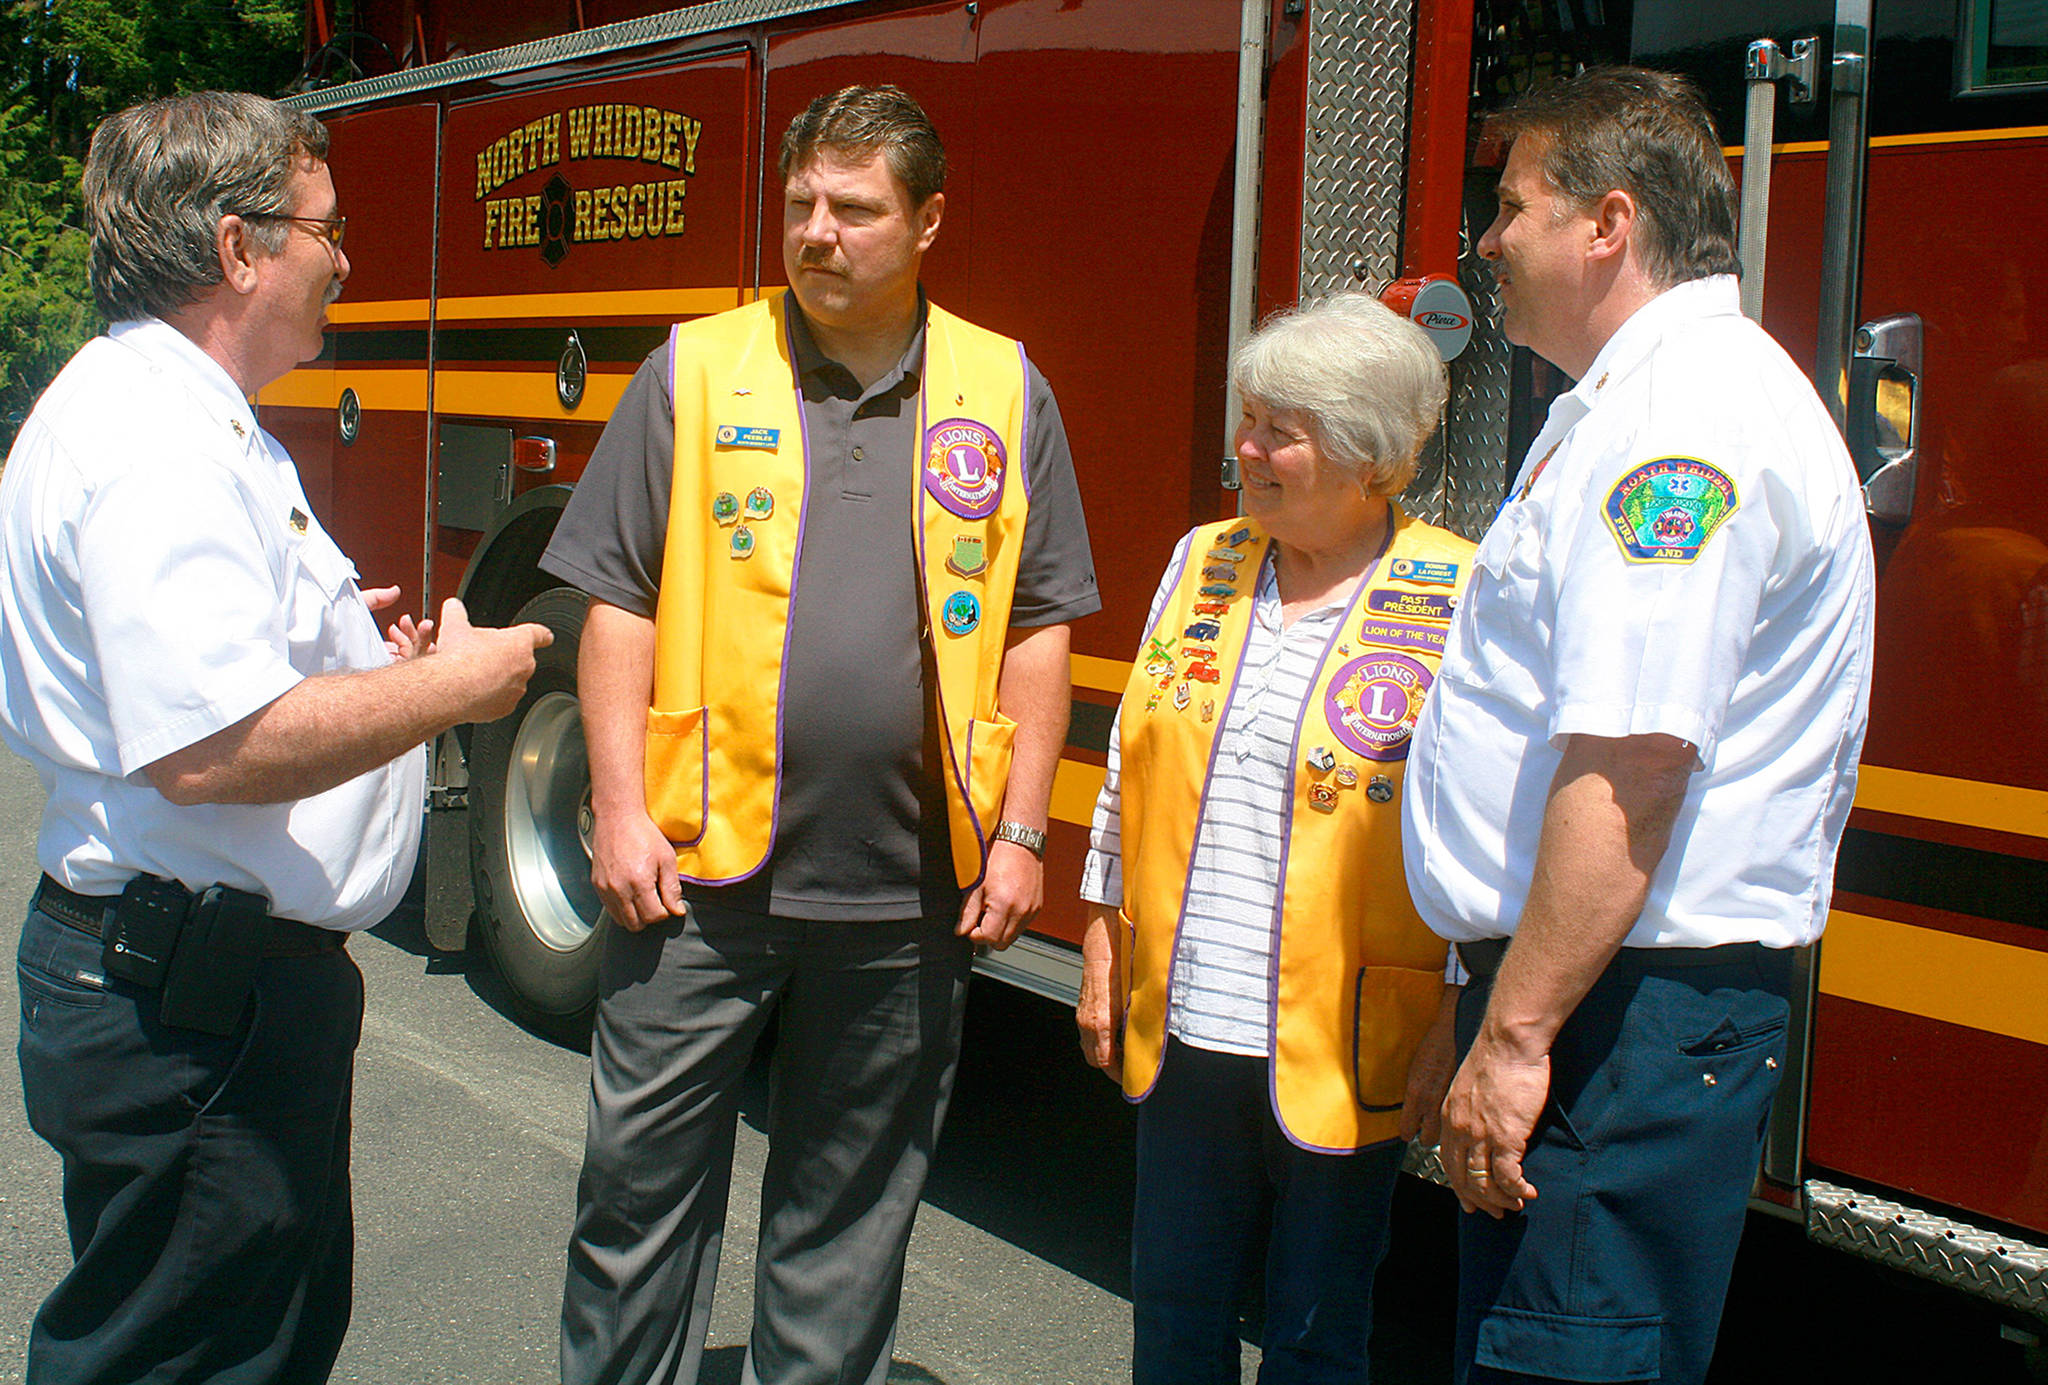 From left, Fire Chief Mike Brown, North Whidbey Lions President Jack Peebles, past-president Bonnie LaForest and Deputy Fire Chief Mark Kirko discuss their new partnership Wednesday at the VFW. North Whidbey Lions gave North Whidbey Fire and Rescue $10,000 to kick off its legacy project. Photo by Daniel Warn/Whidbey News-Times